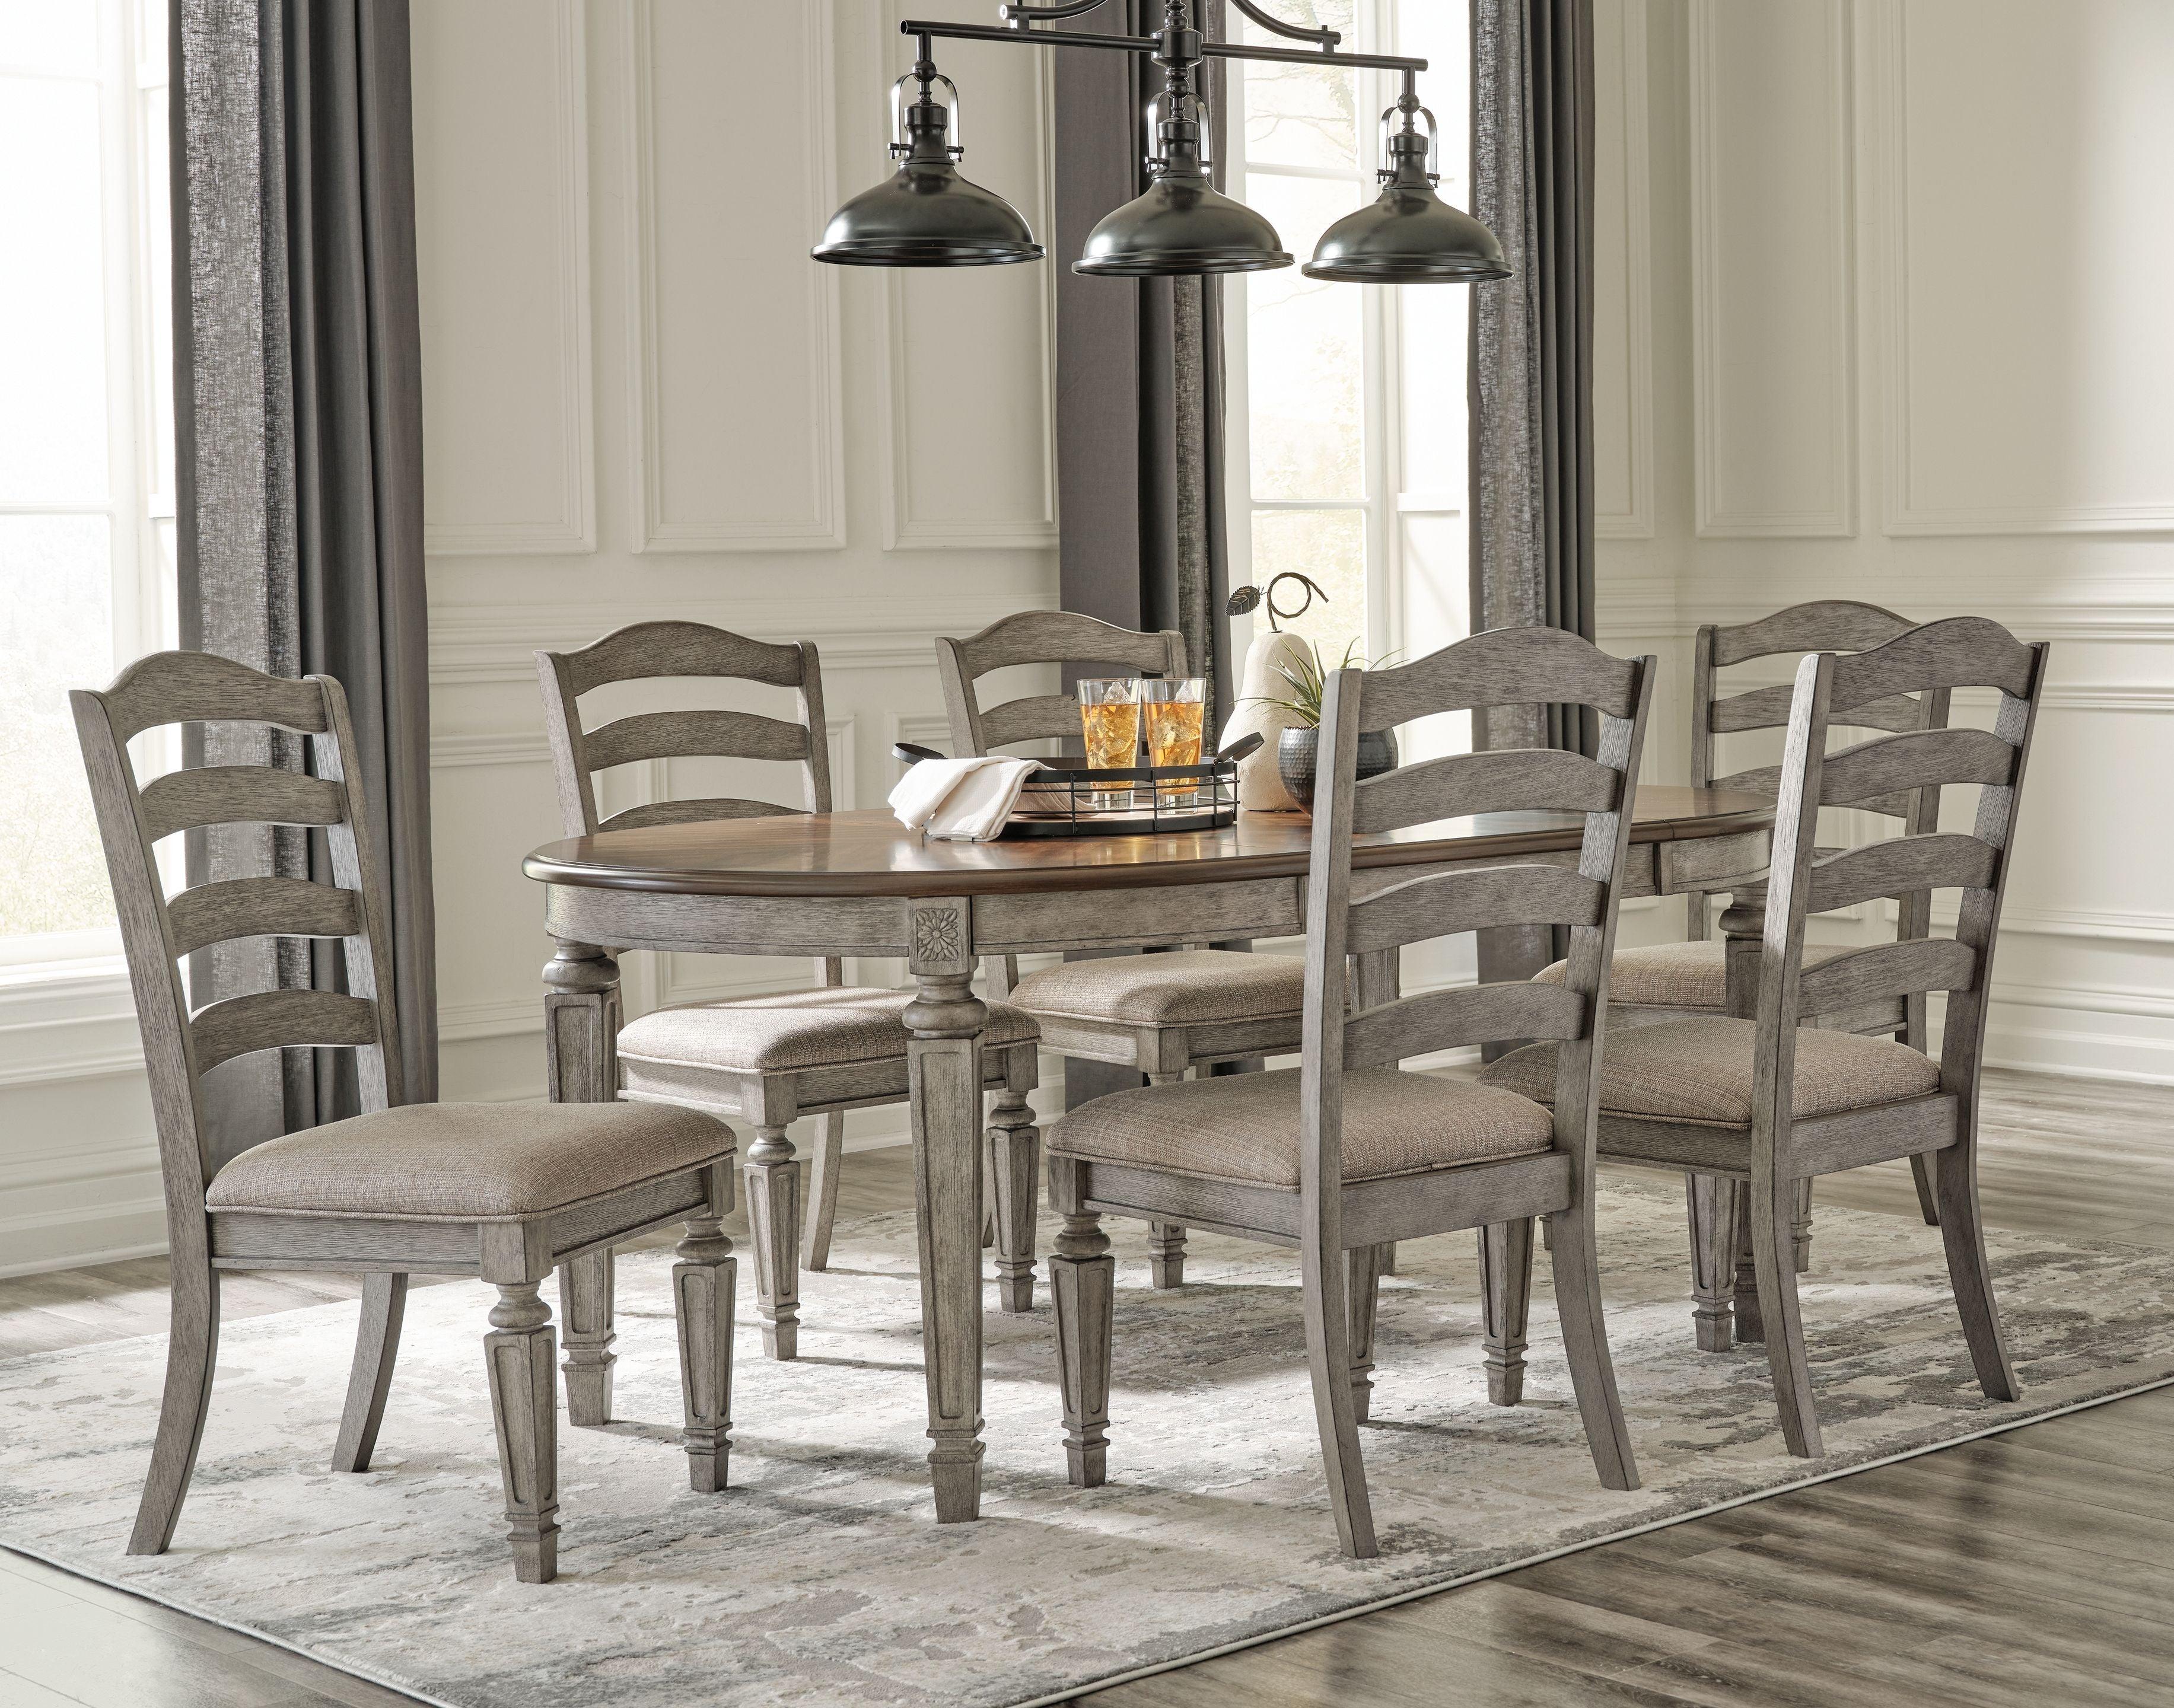 Signature Design by Ashley® - Lodenbay - Extensiontable Dining Room Set - 5th Avenue Furniture